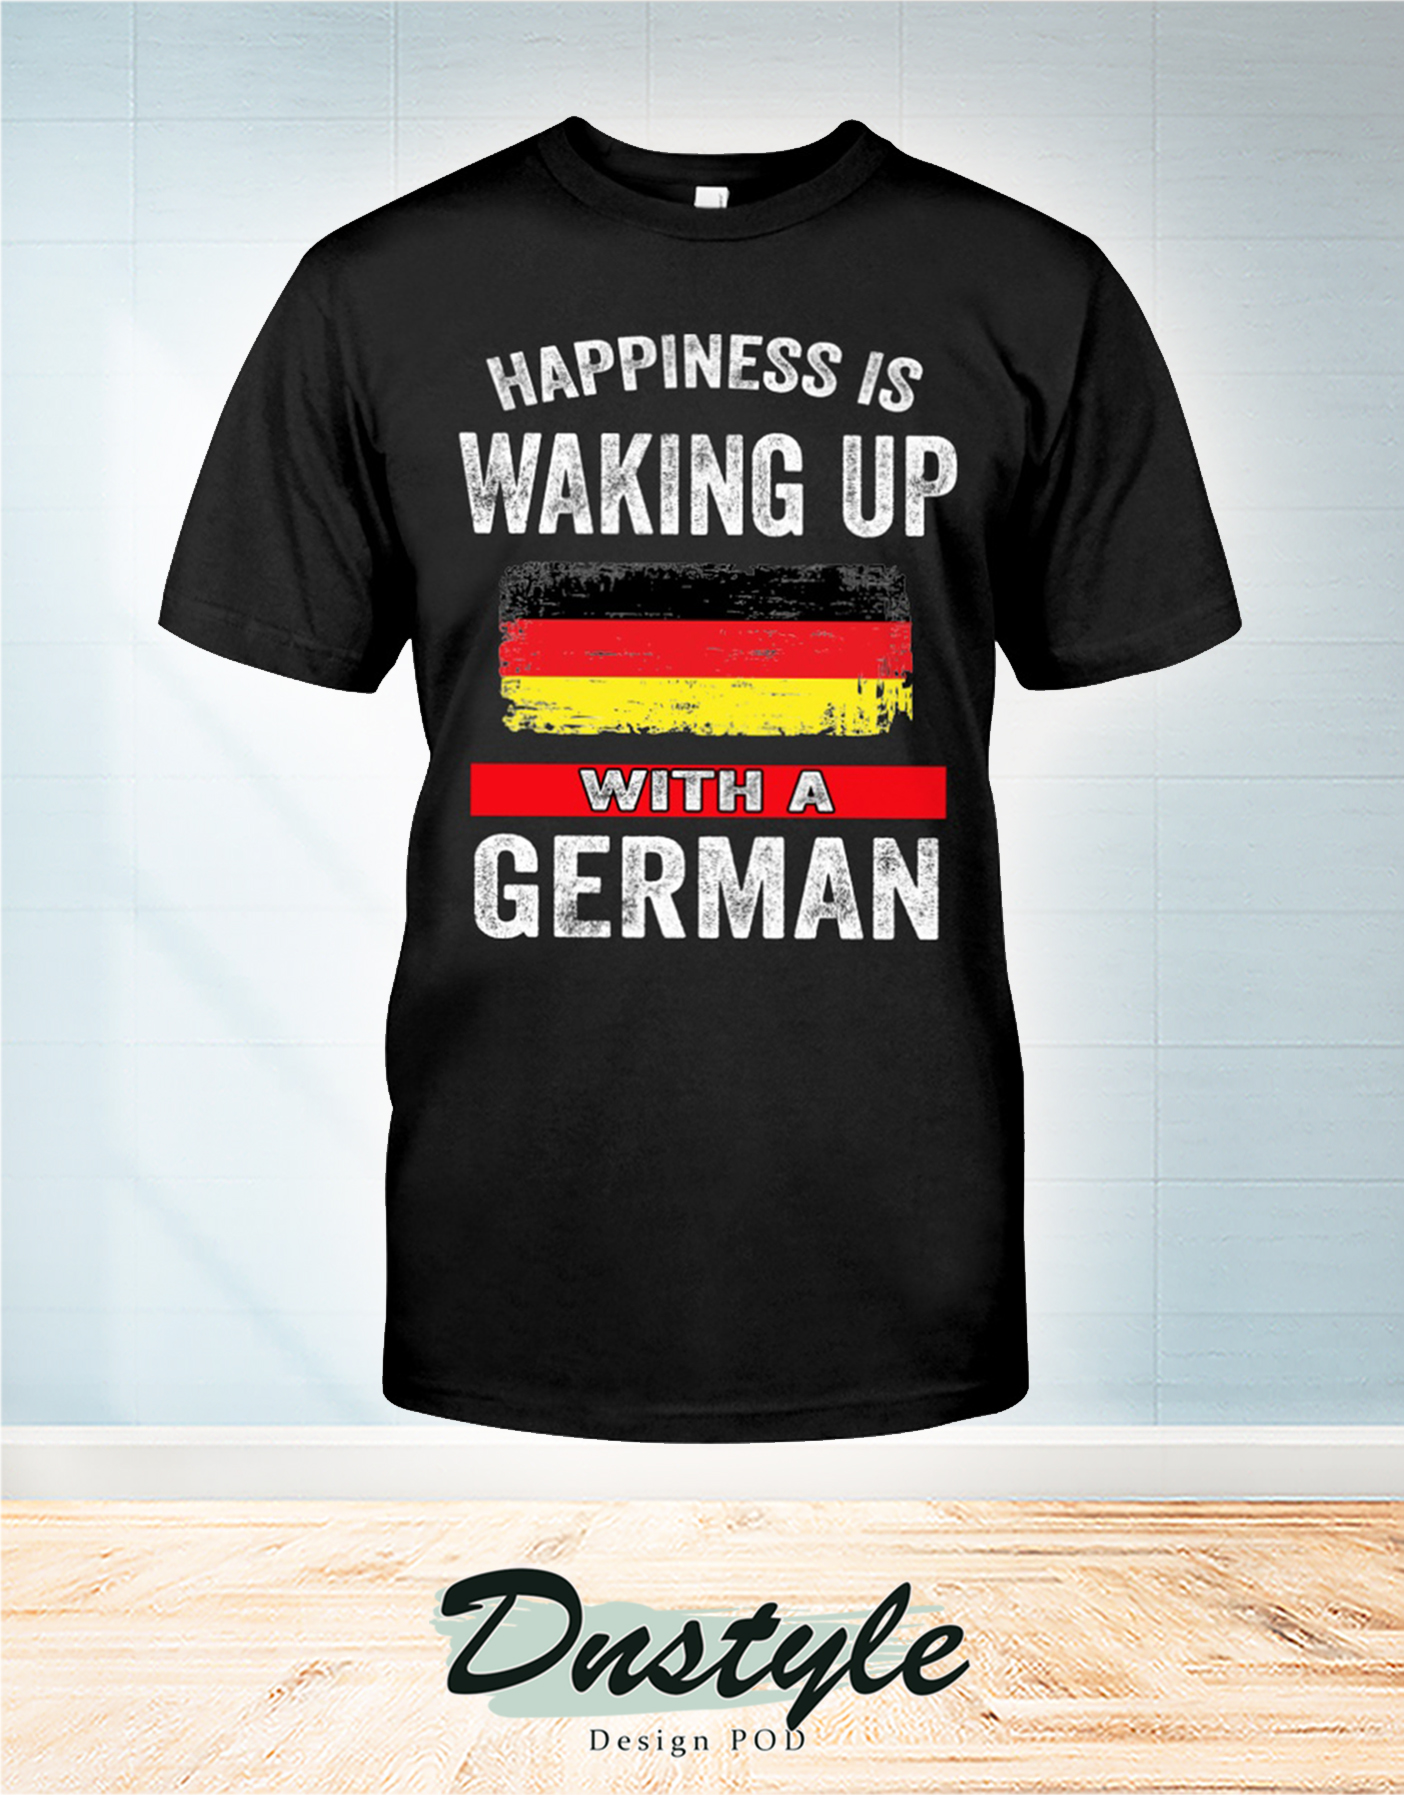 Happiness is waking up with a German t-shirt